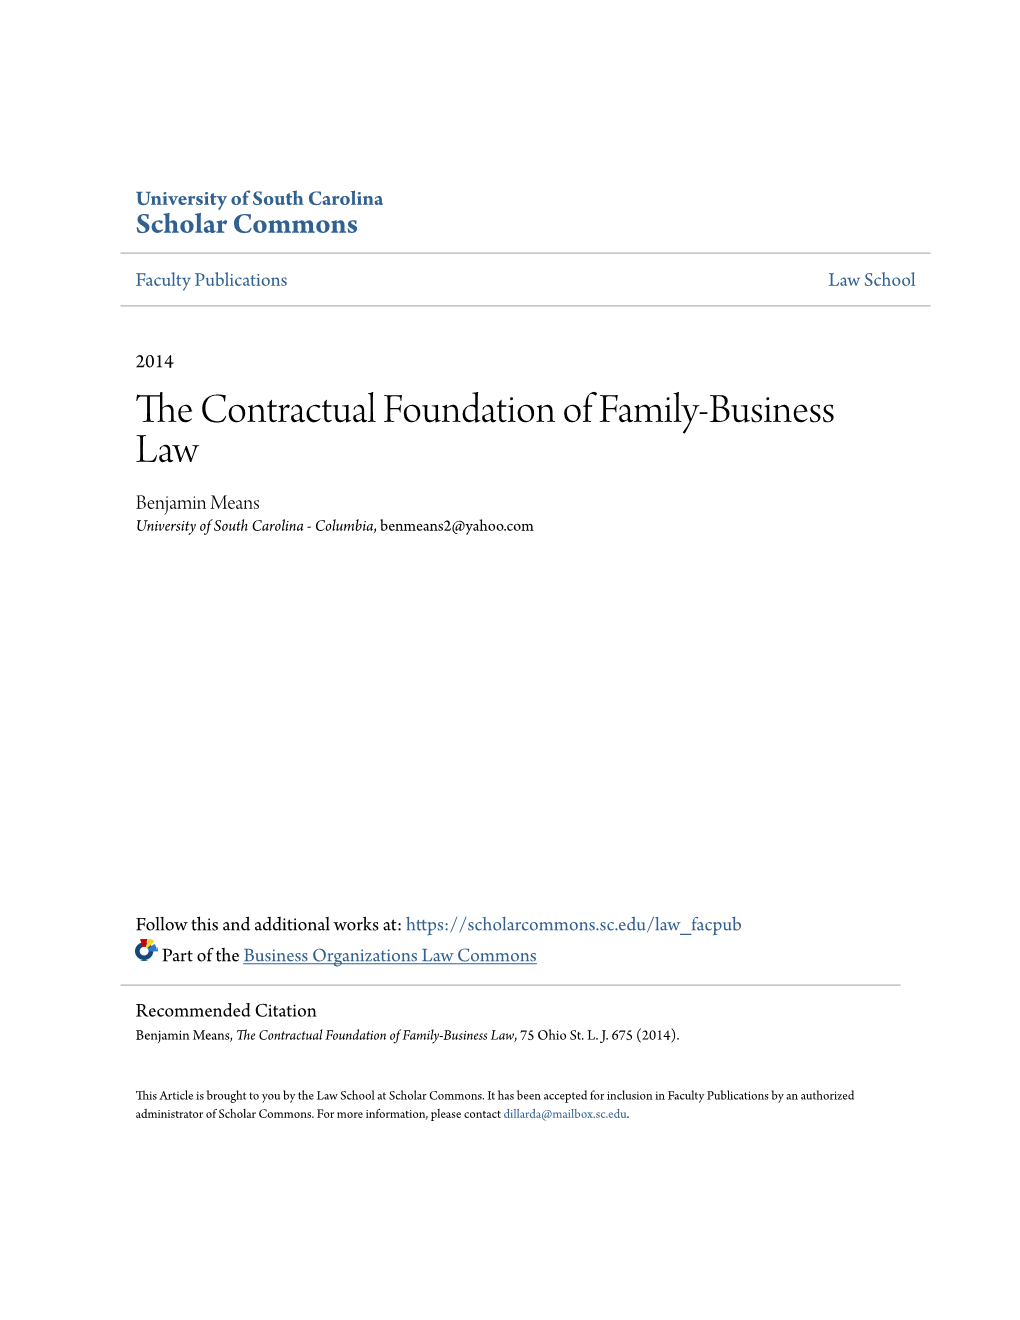 The Contractual Foundation of Family-Business Law, 75 Ohio St